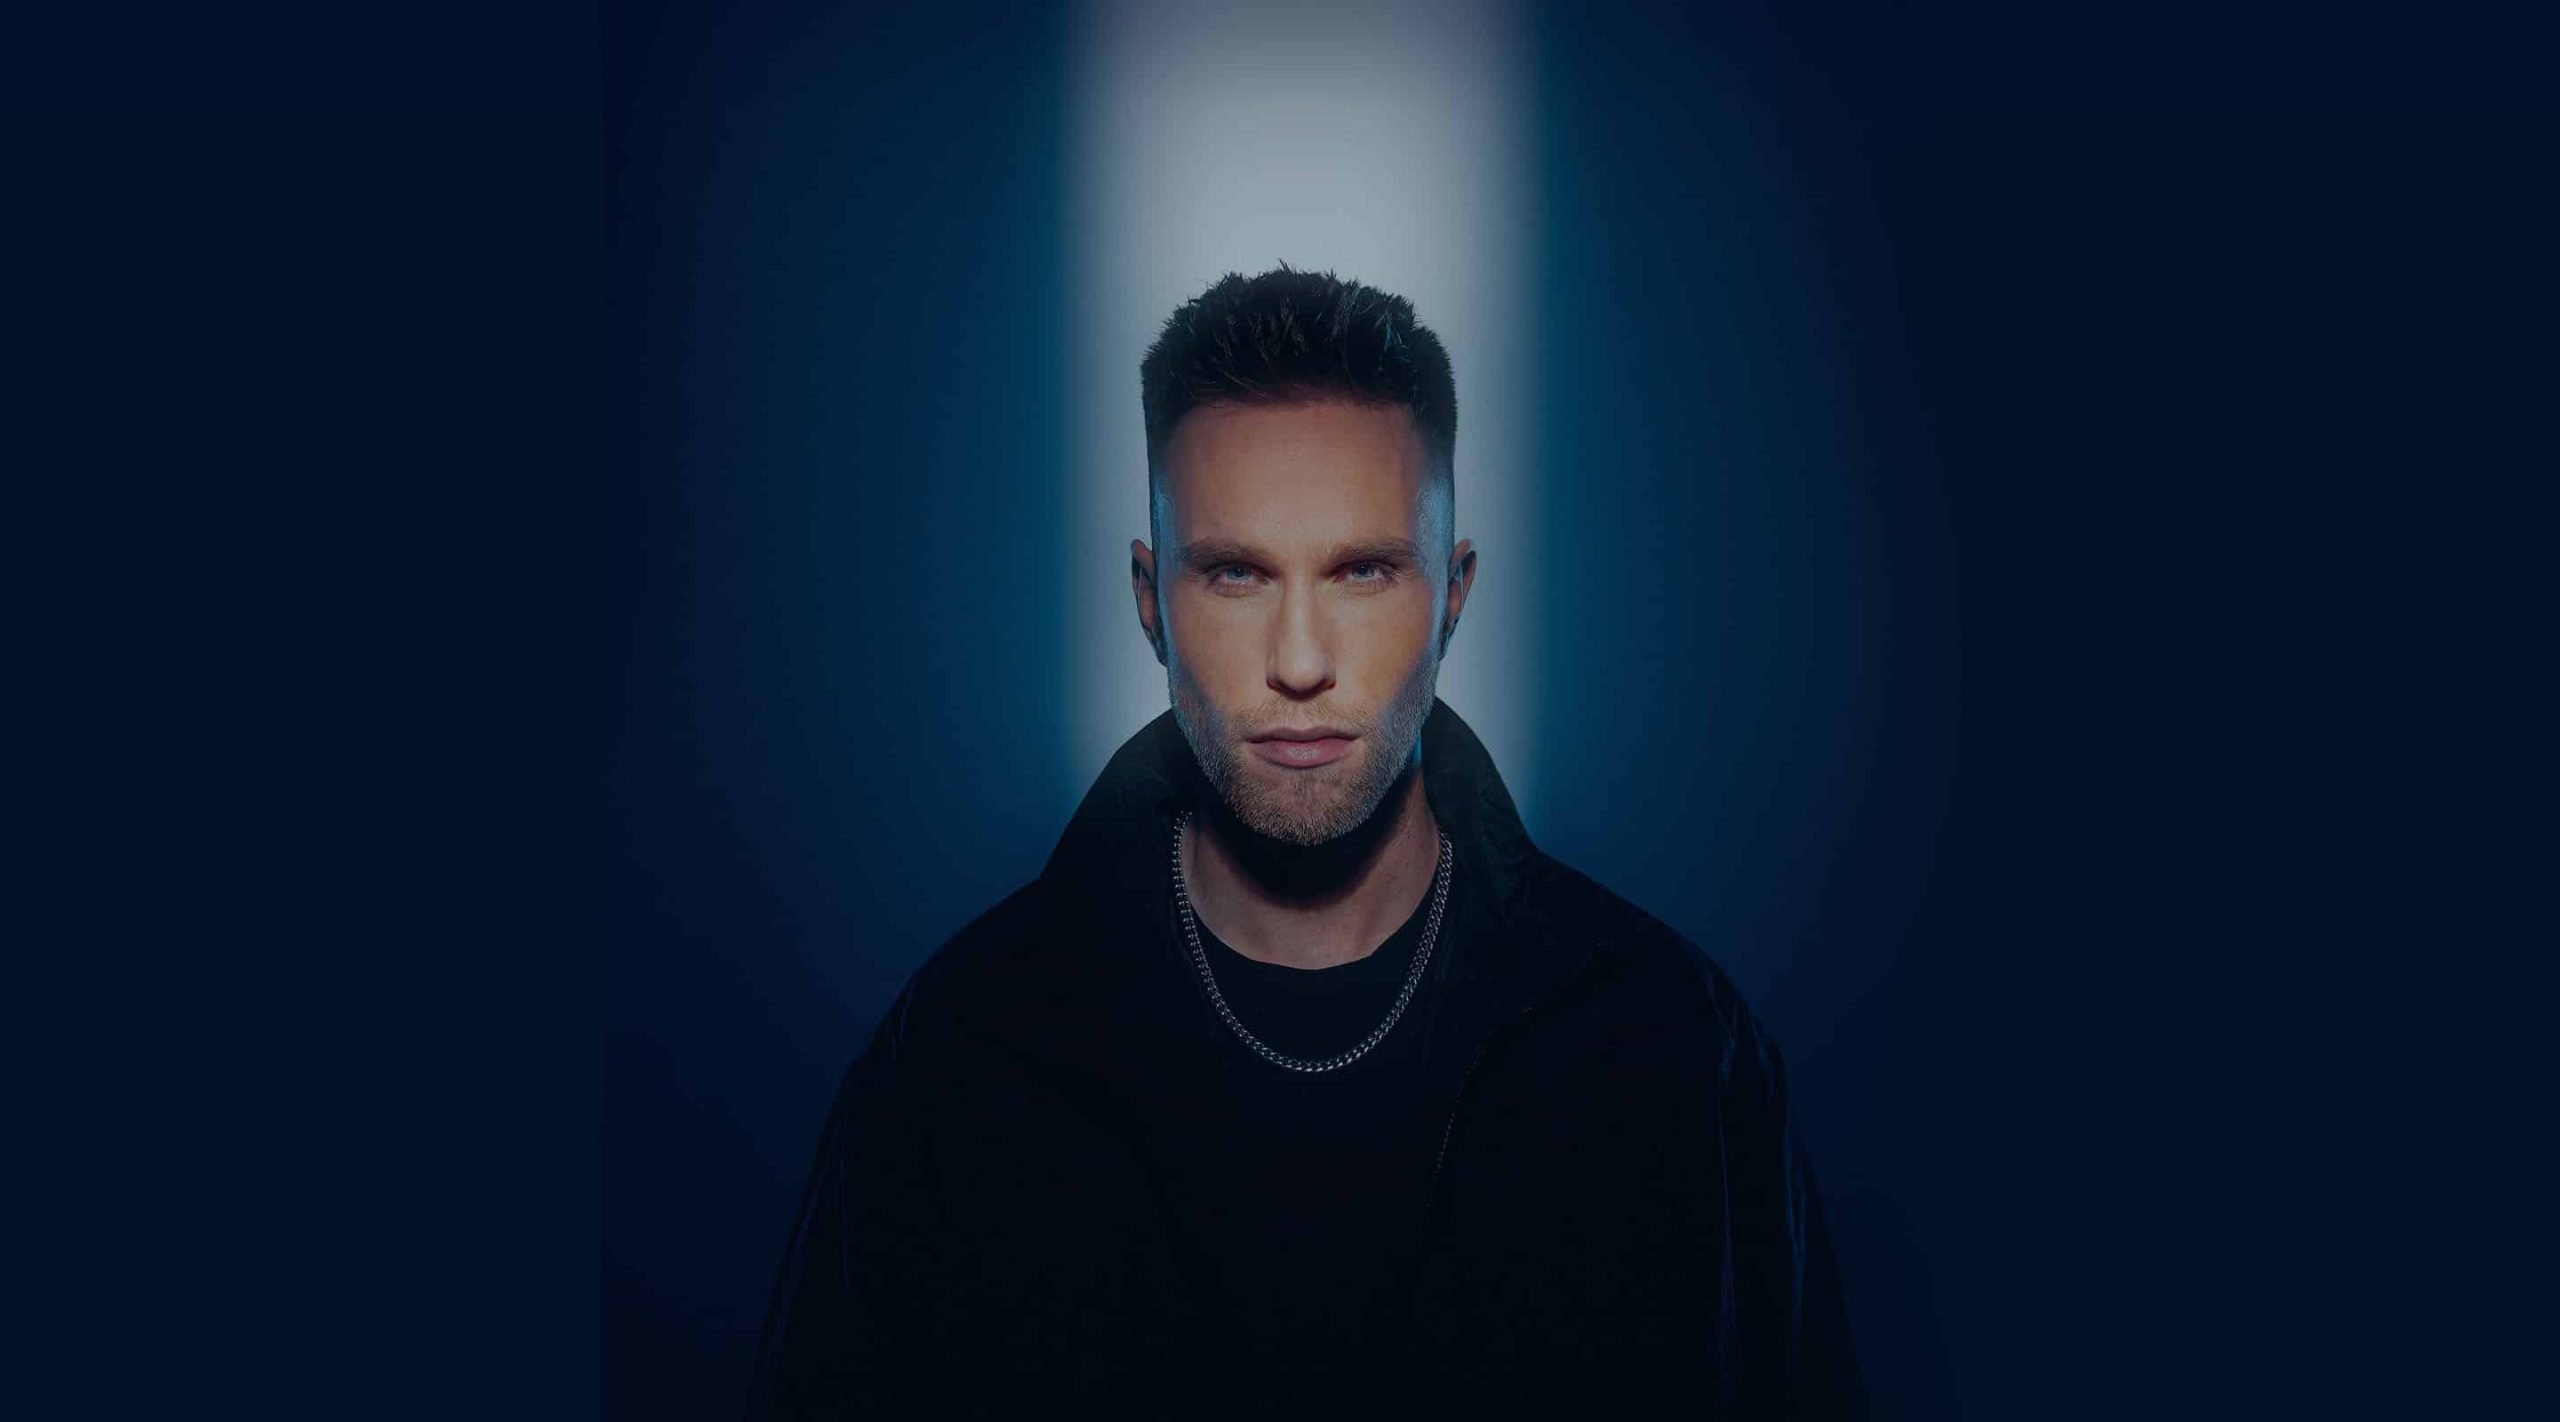 Nicky Romero expands his Nightvision EP with ‘Desire’ alongside TELYKAST & Linney: Listen